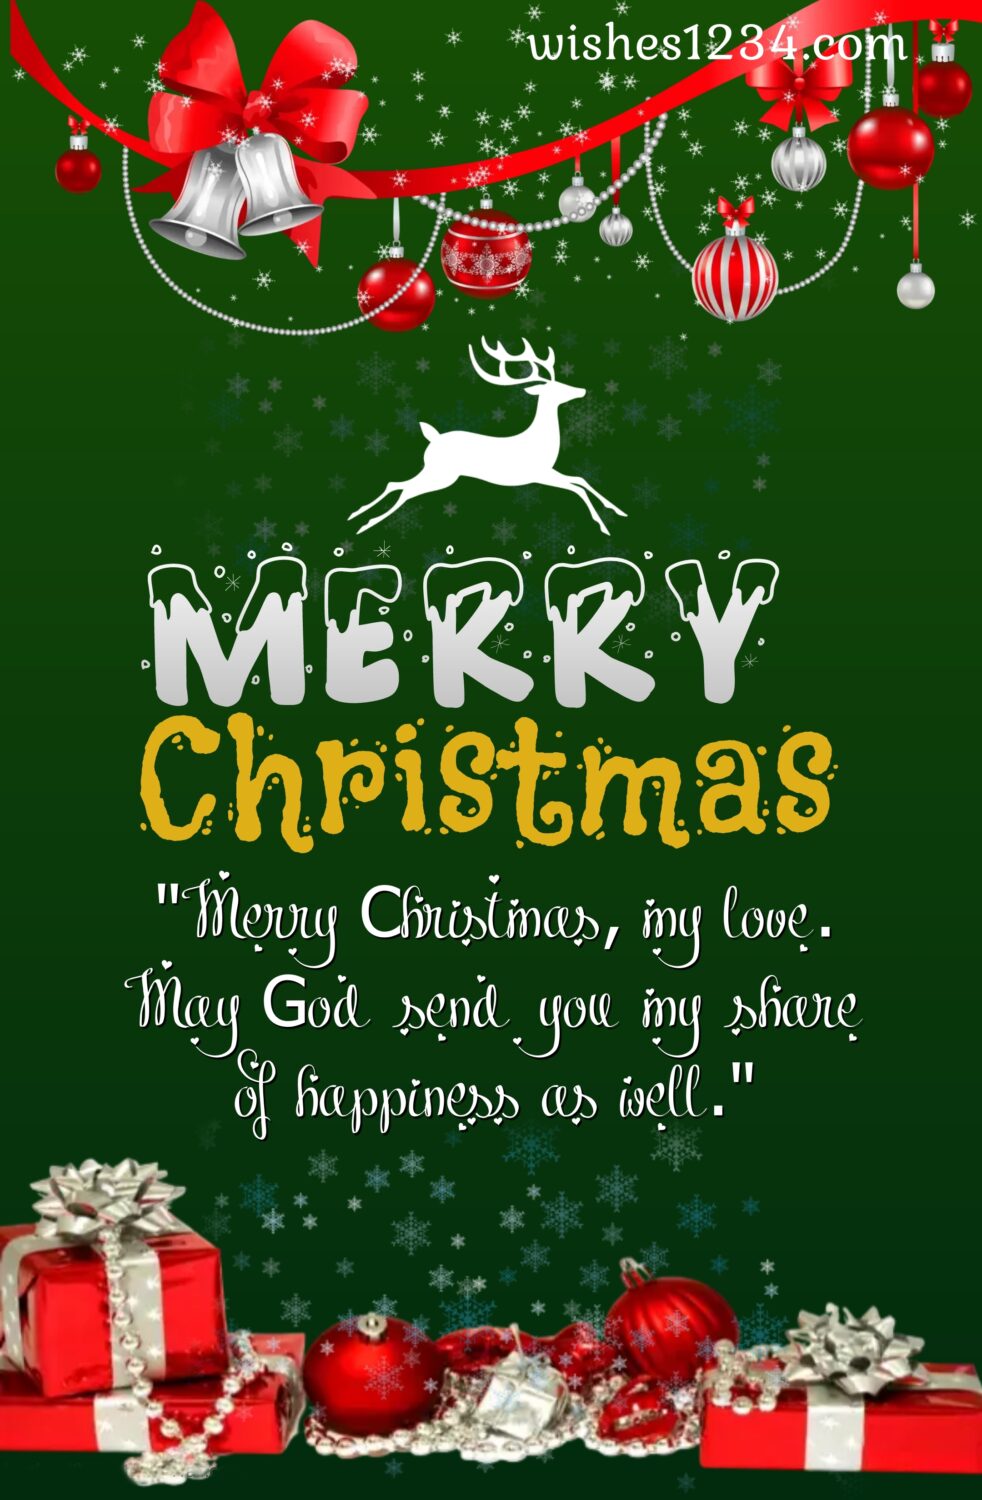 Reindeer with gifts, Merry Christmas Quotes & short wishes.